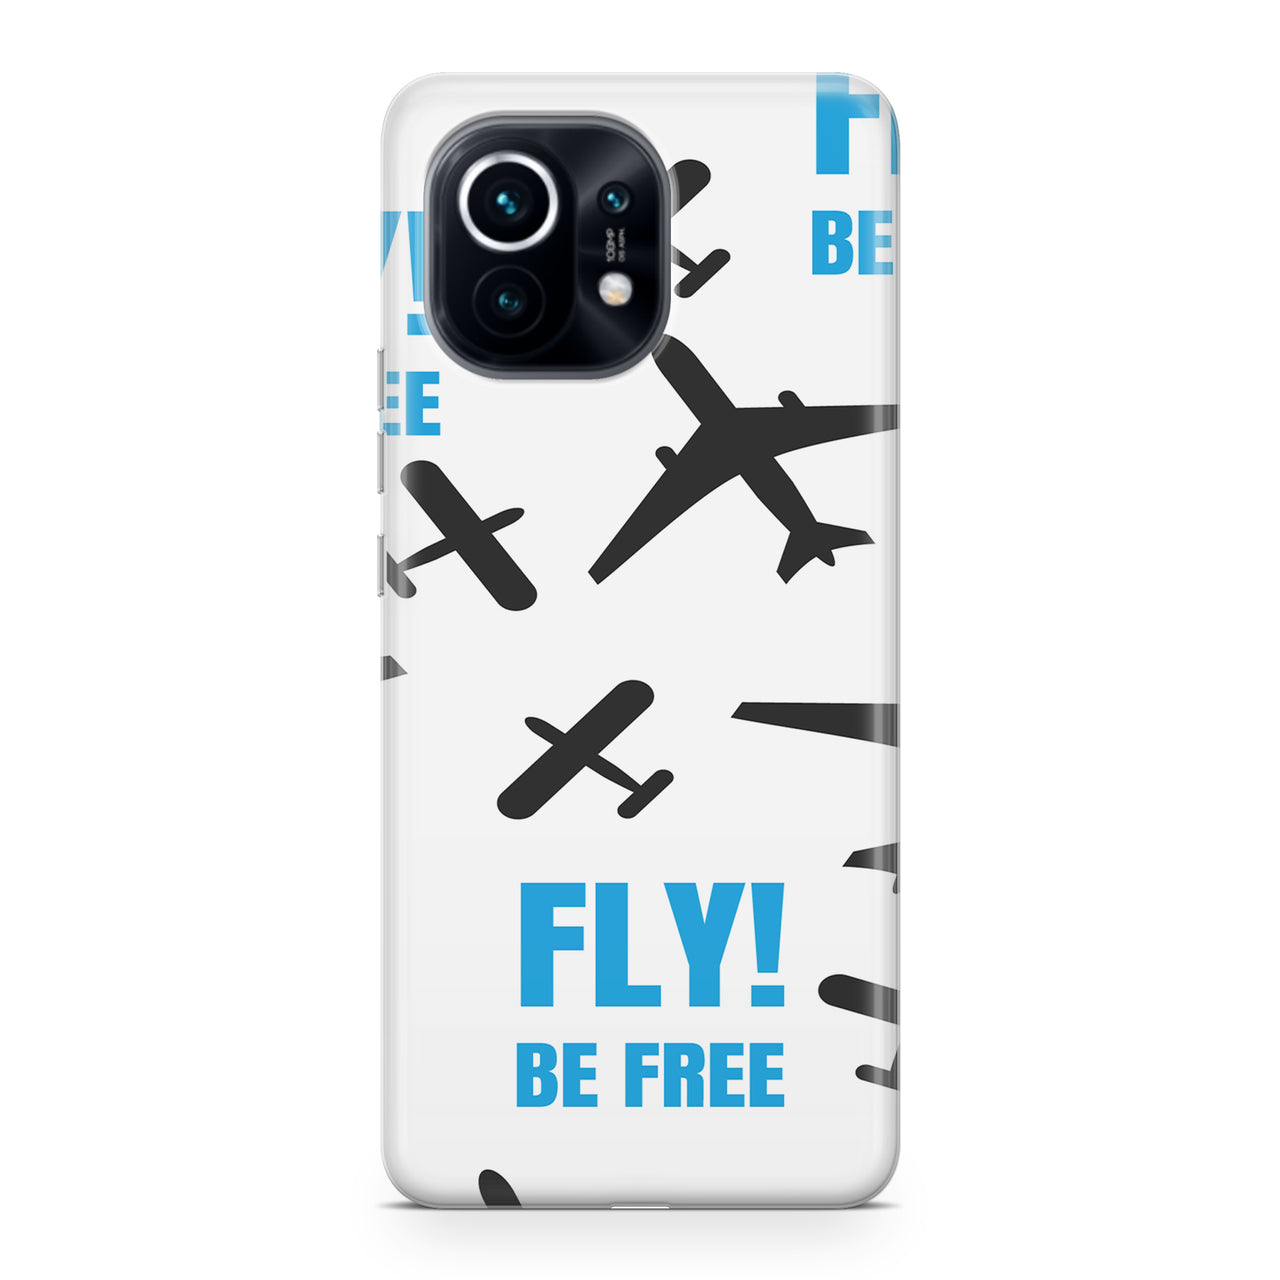 Fly Be Free White Designed Xiaomi Cases